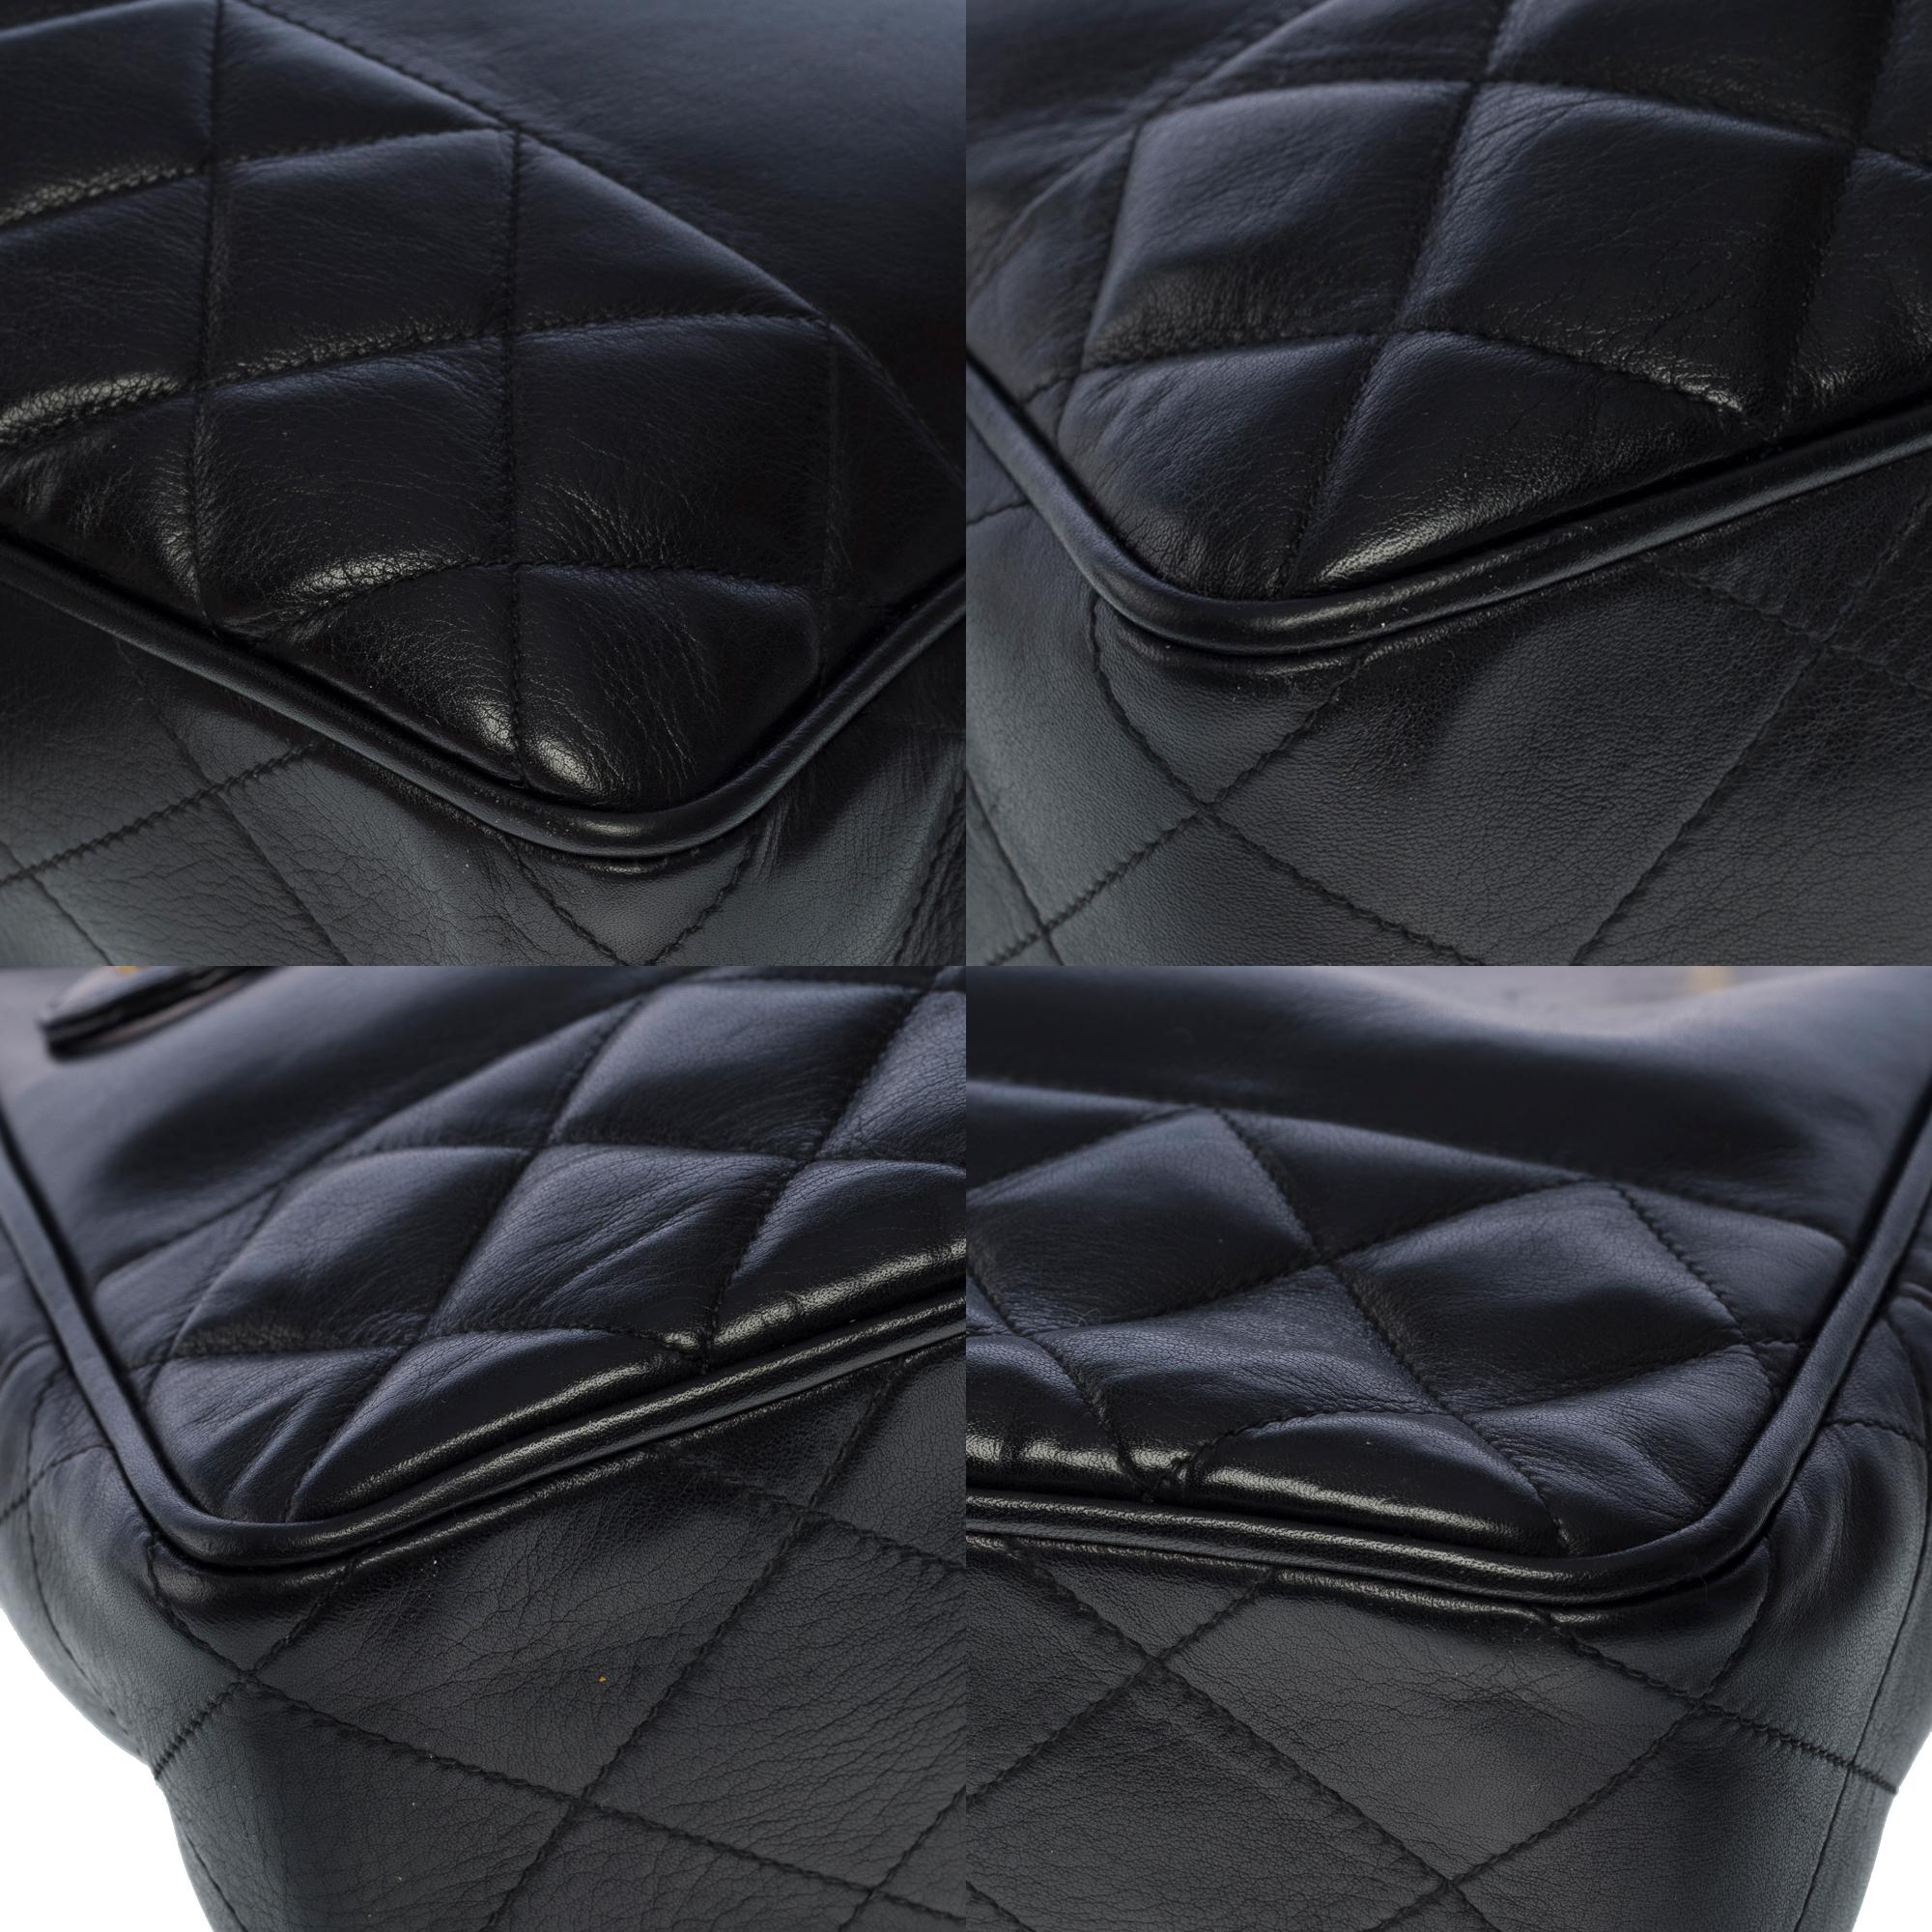 Charming Chanel Classic Shopping Tote bag in black quilted lambskin leather, GHW 6